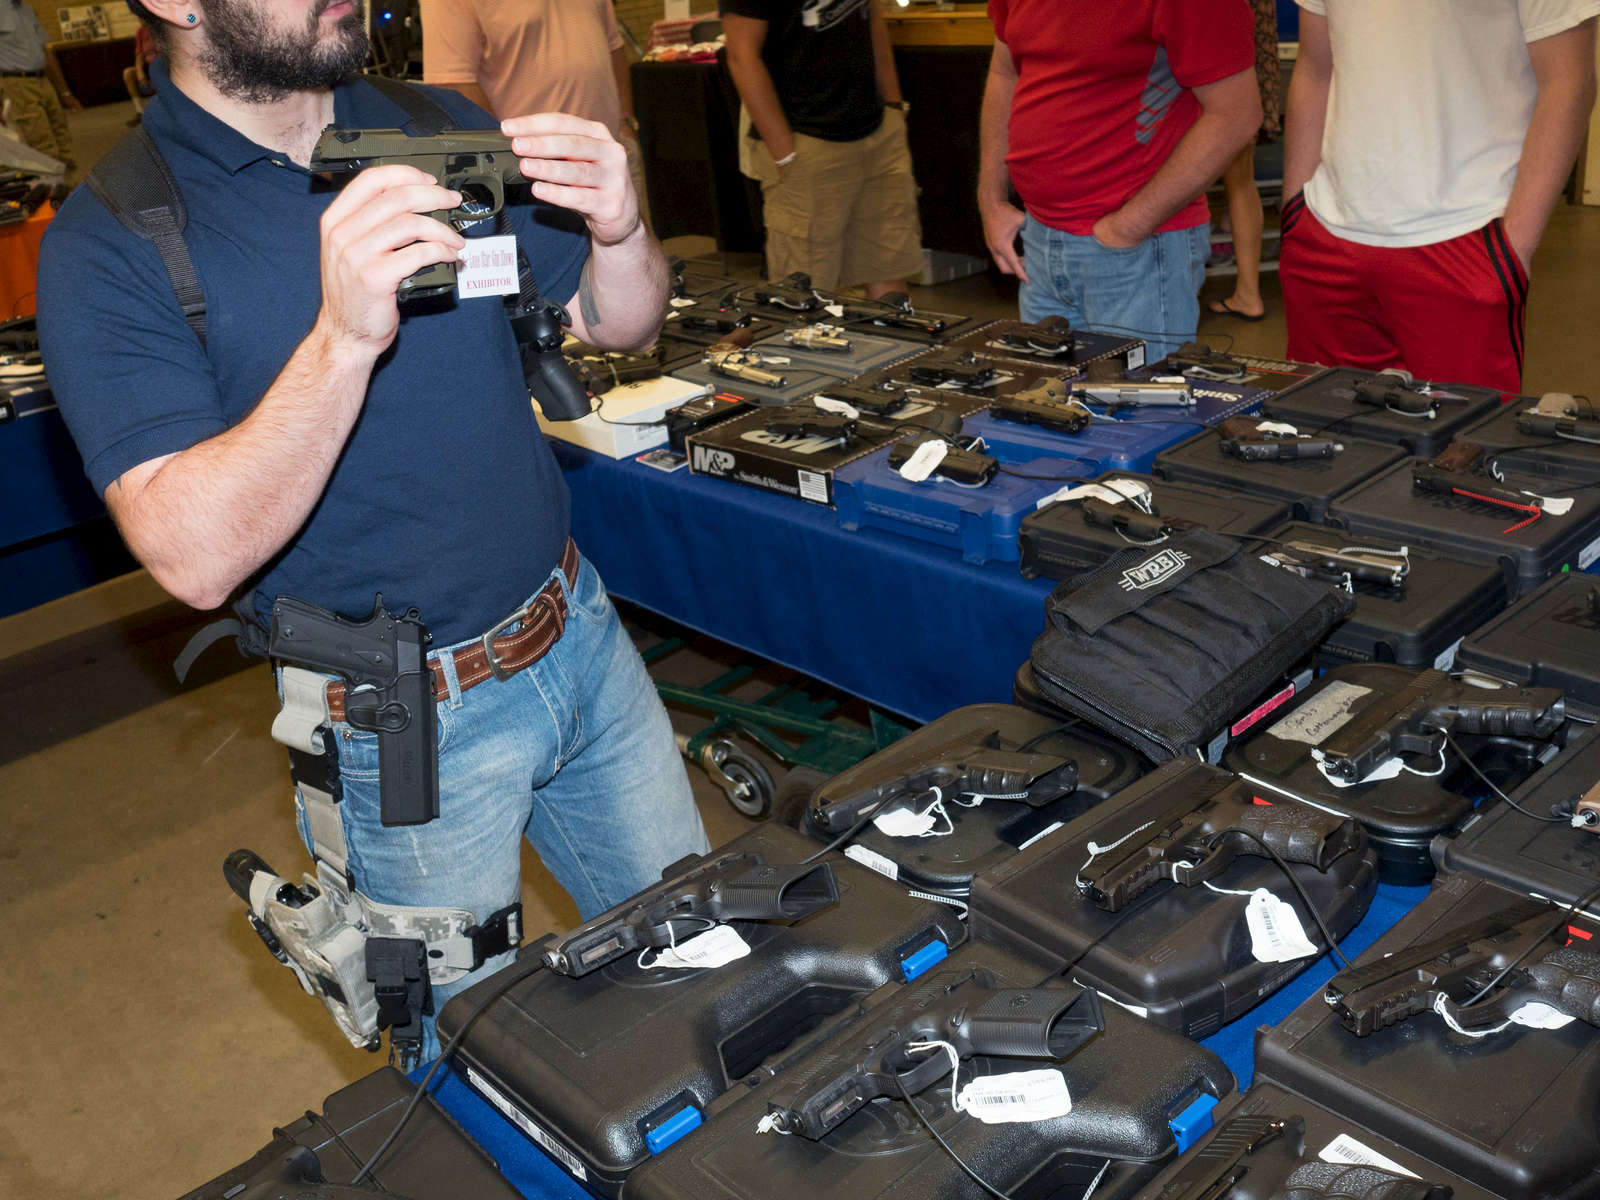 A stall employee checks a second hand gun at a show hosted at the Will rogers Memorial Center in Fort Worth.Dallas is a major city in Texas and is the largest urban center of the fourth most populous metropolitan area in the United States. The city ranks ninth in the U.S. and third in Texas after Houston and San Antonio. The city's prominence arose from its historical importance as a center for the oil and cotton industries, and its position along numerous railroad lines.For two weeks in the summer of 2015, photographer Peter Dench visited Dallas to document the metroplex in his epic reportage, DENCH DOES DALLAS.Photographed using an Olympus E-M5 Mark II©Peter Dench/Getty Images Reportage